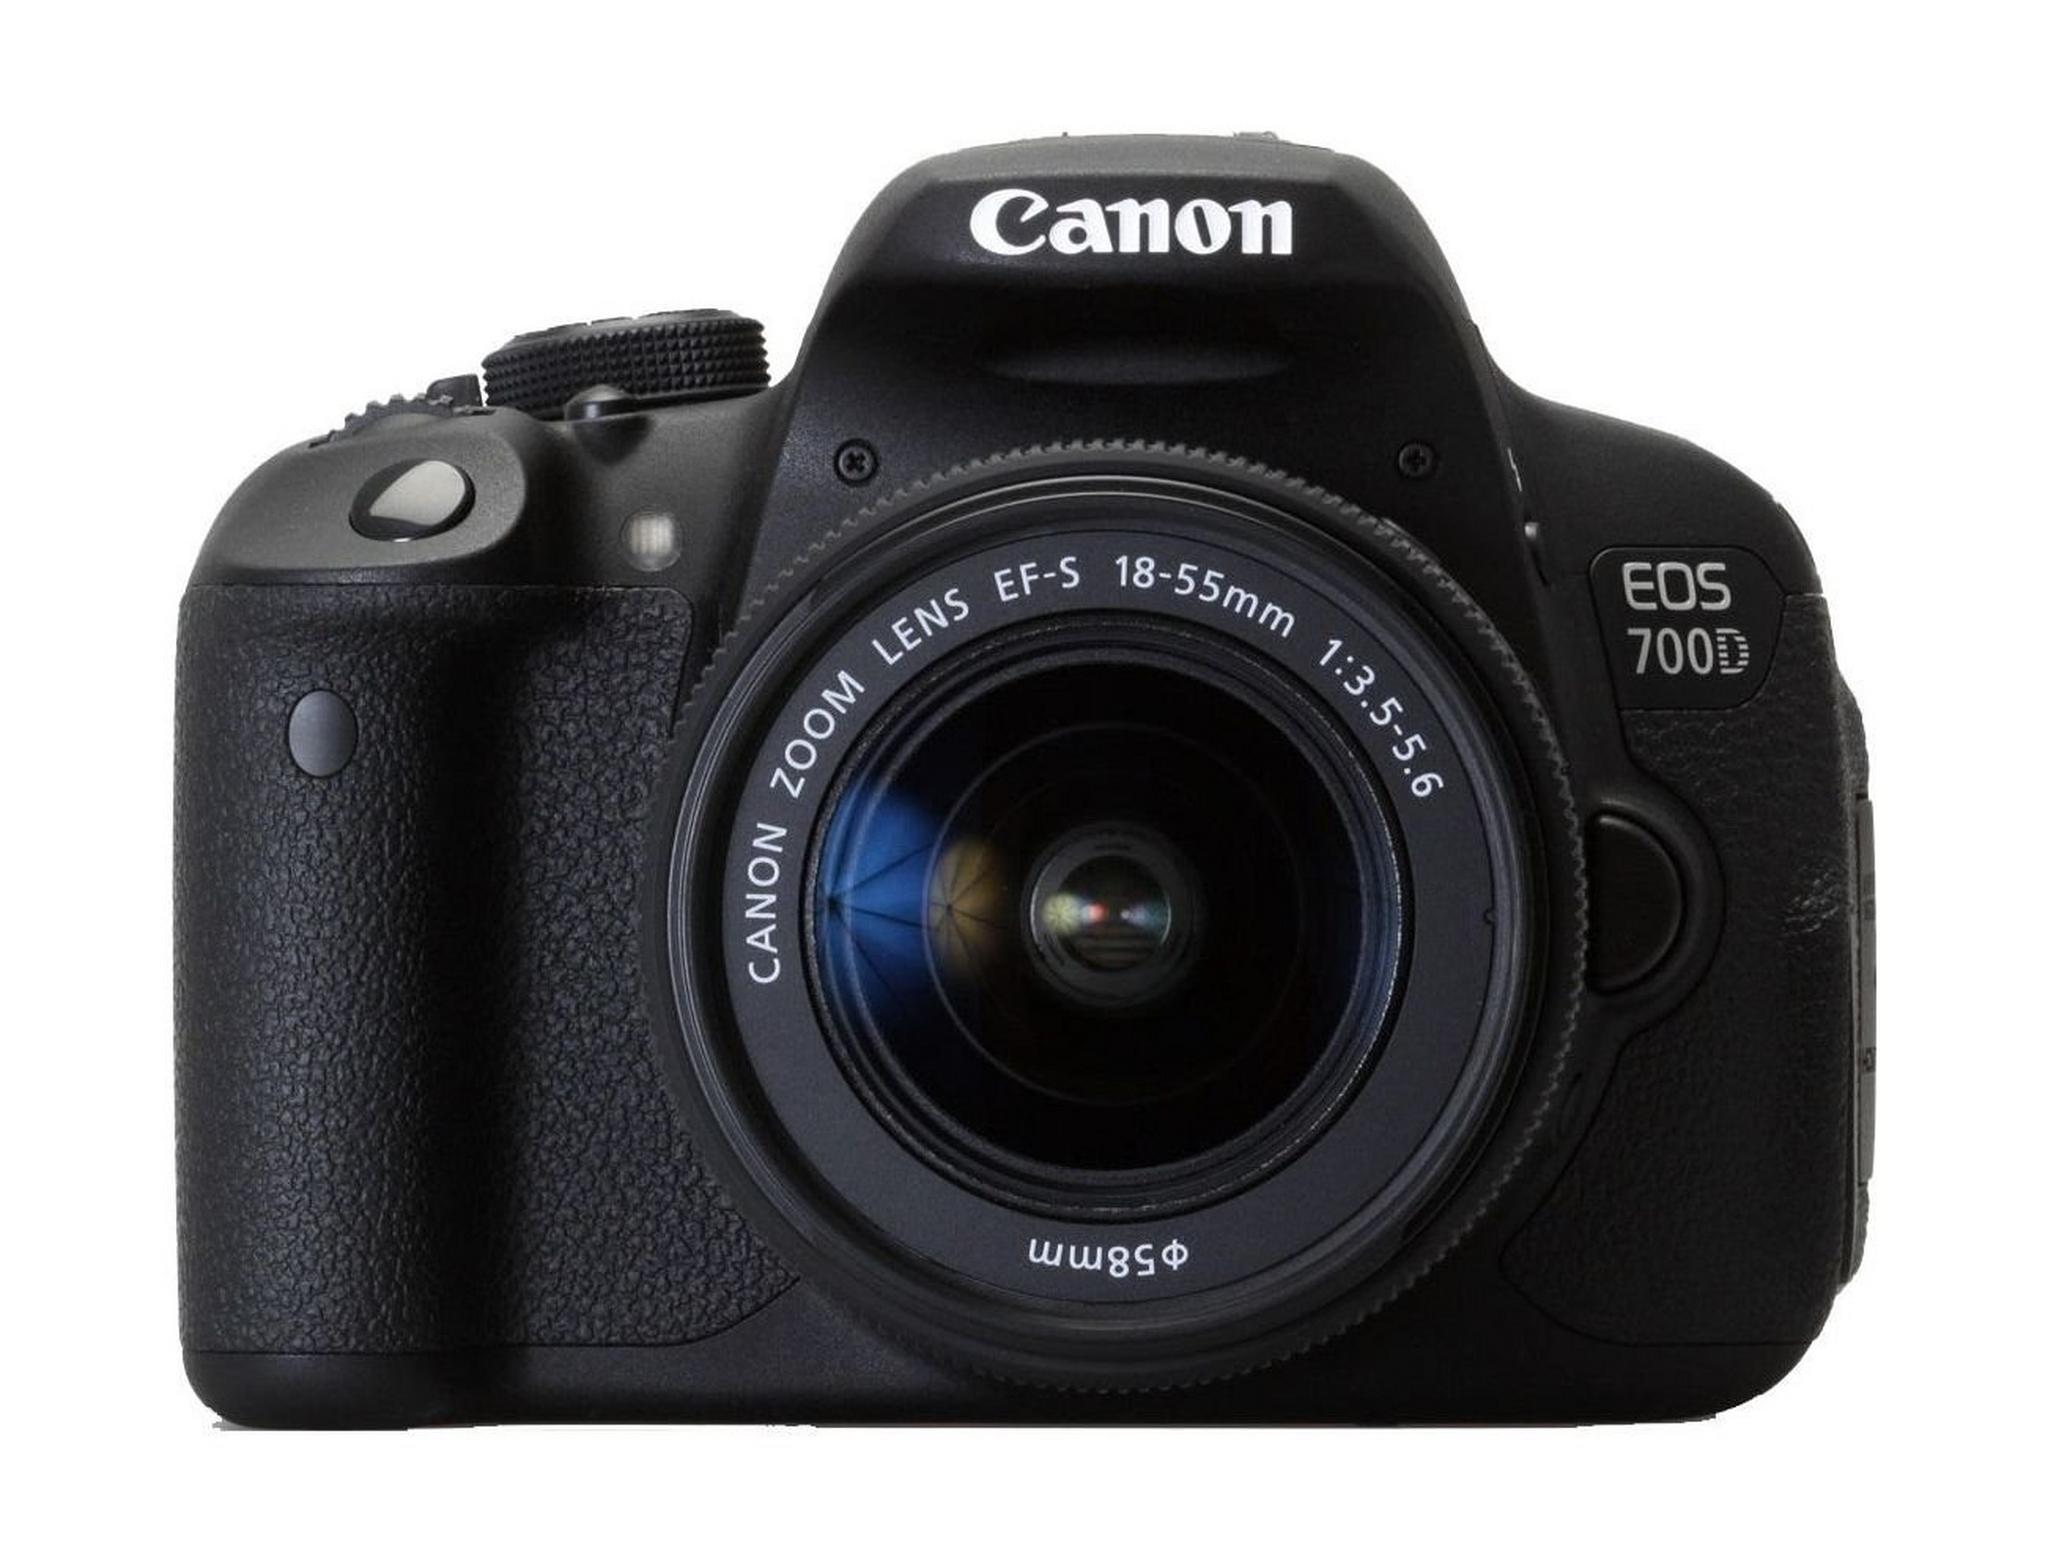 Canon EOS-700D 18MP DSLR Camera With 18-55mm Zoom Lens